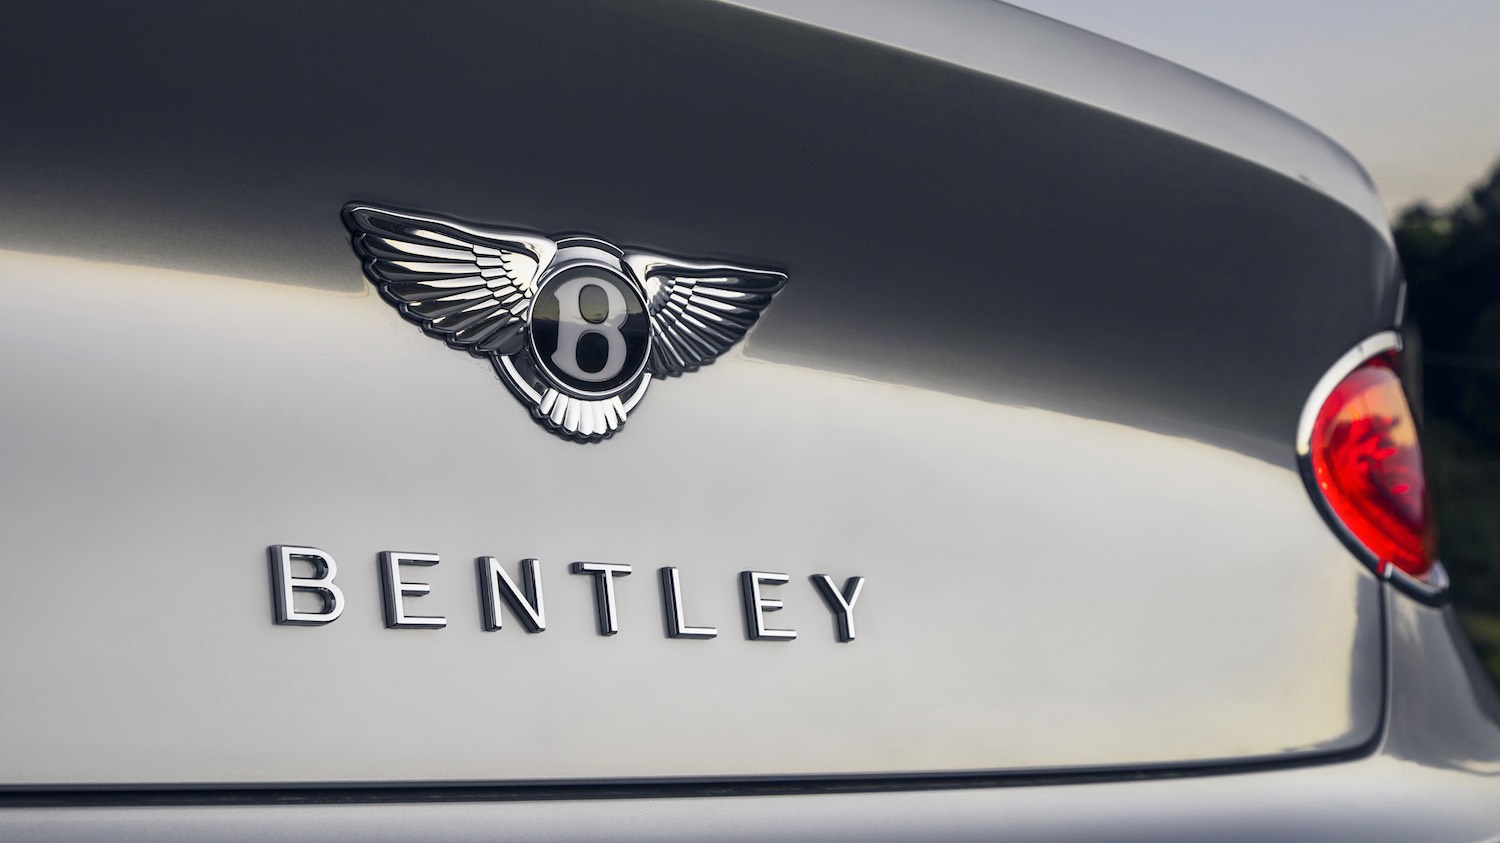 Maggie Barry reviews the New Bentley Continental GT for Drive 10